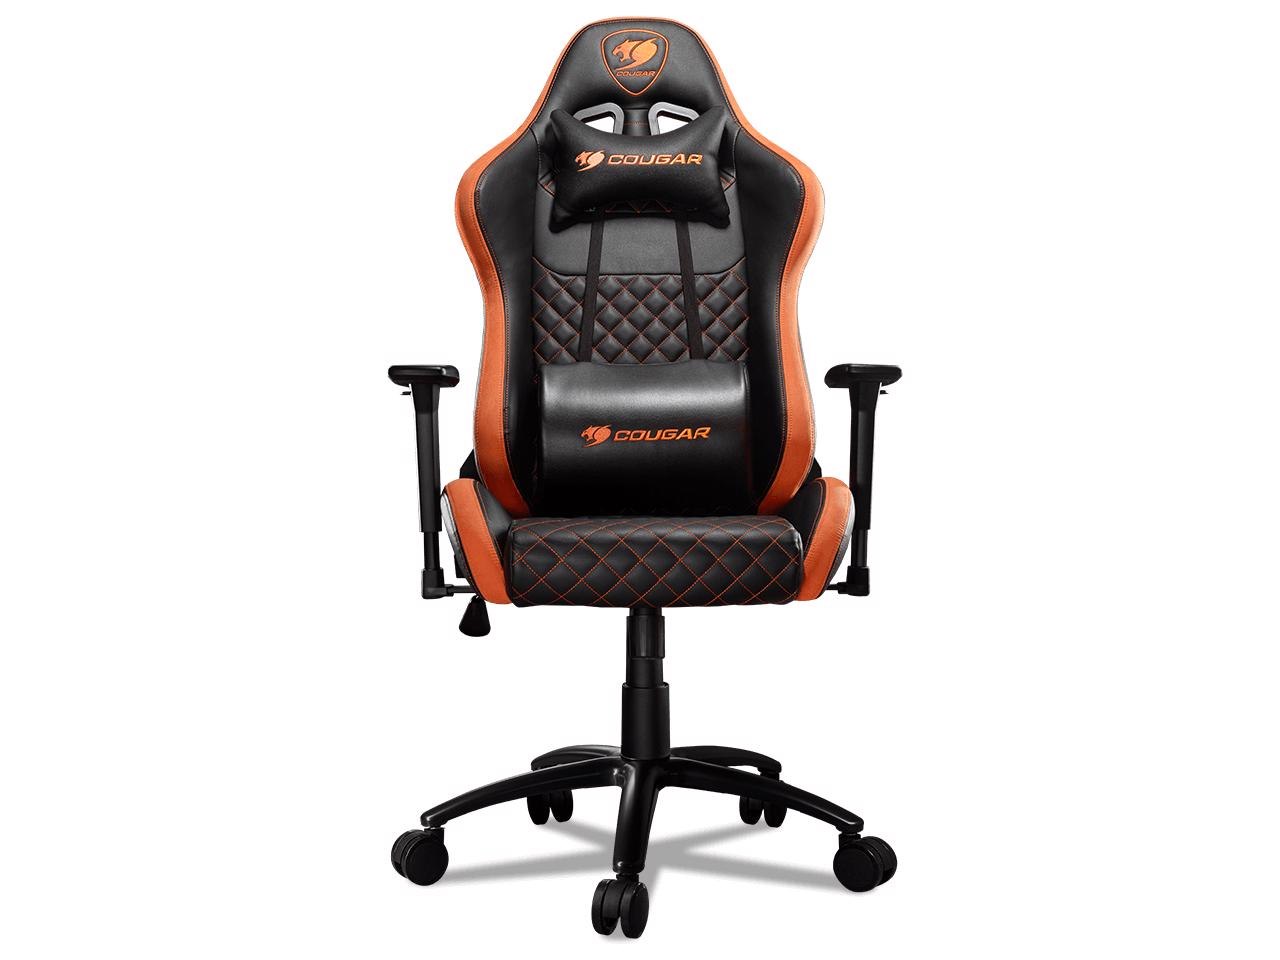 Cougar Armor Pro Gaming Chair With A Steel Frame